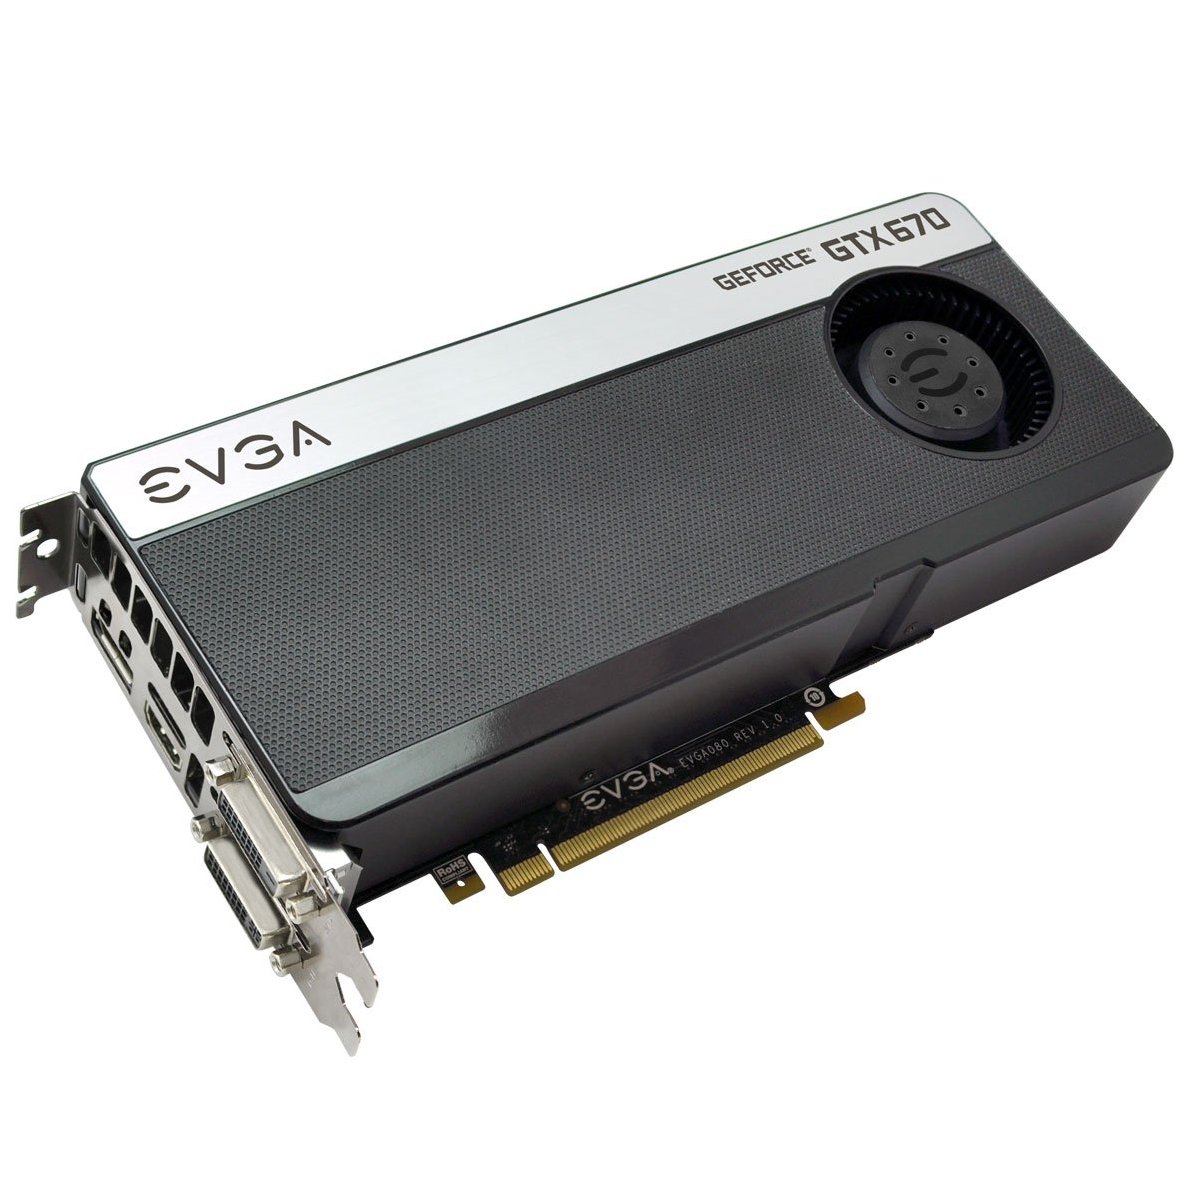 Nvidia Officially Launches the GeForce GTX 670